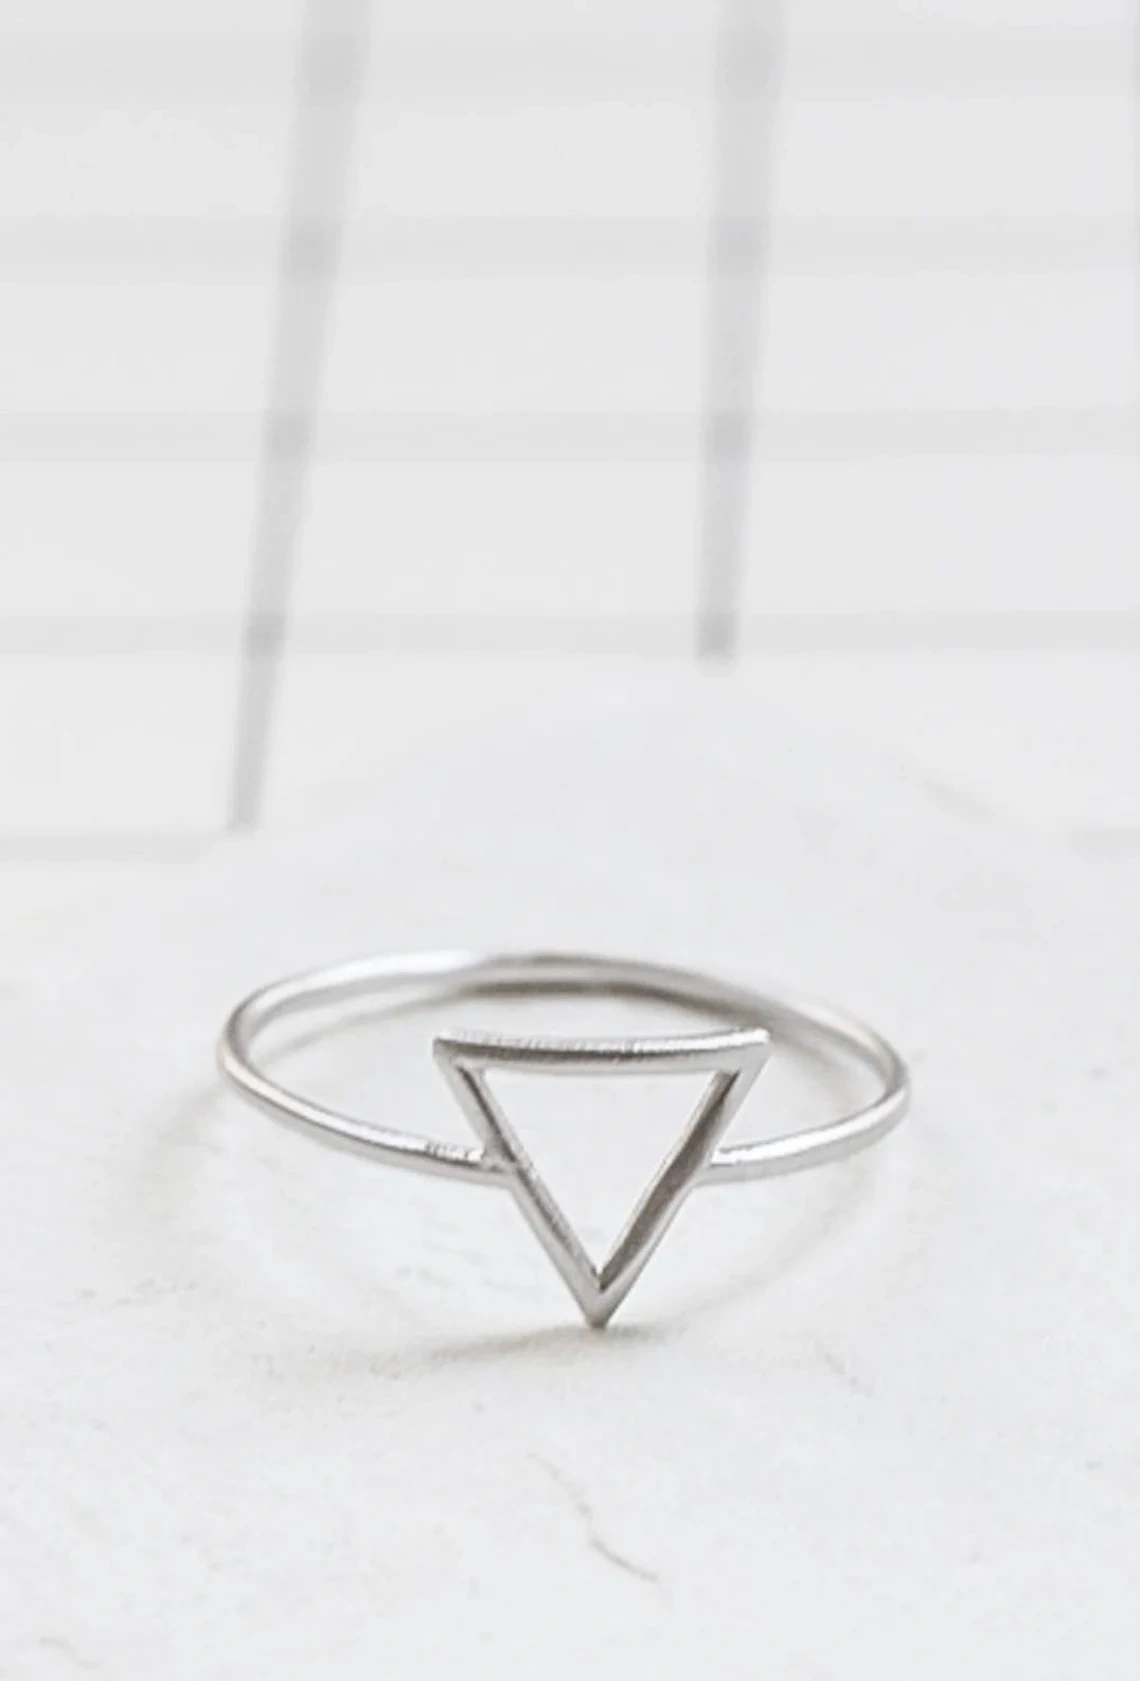 925 Sterling Silver Solid Hollow Open Triangle Ring Handmade Delicate Dainty Stacking Geometric Contemporary Ring Simple Minimalist Jewelry-10 3/4 US/Uk size – V-1